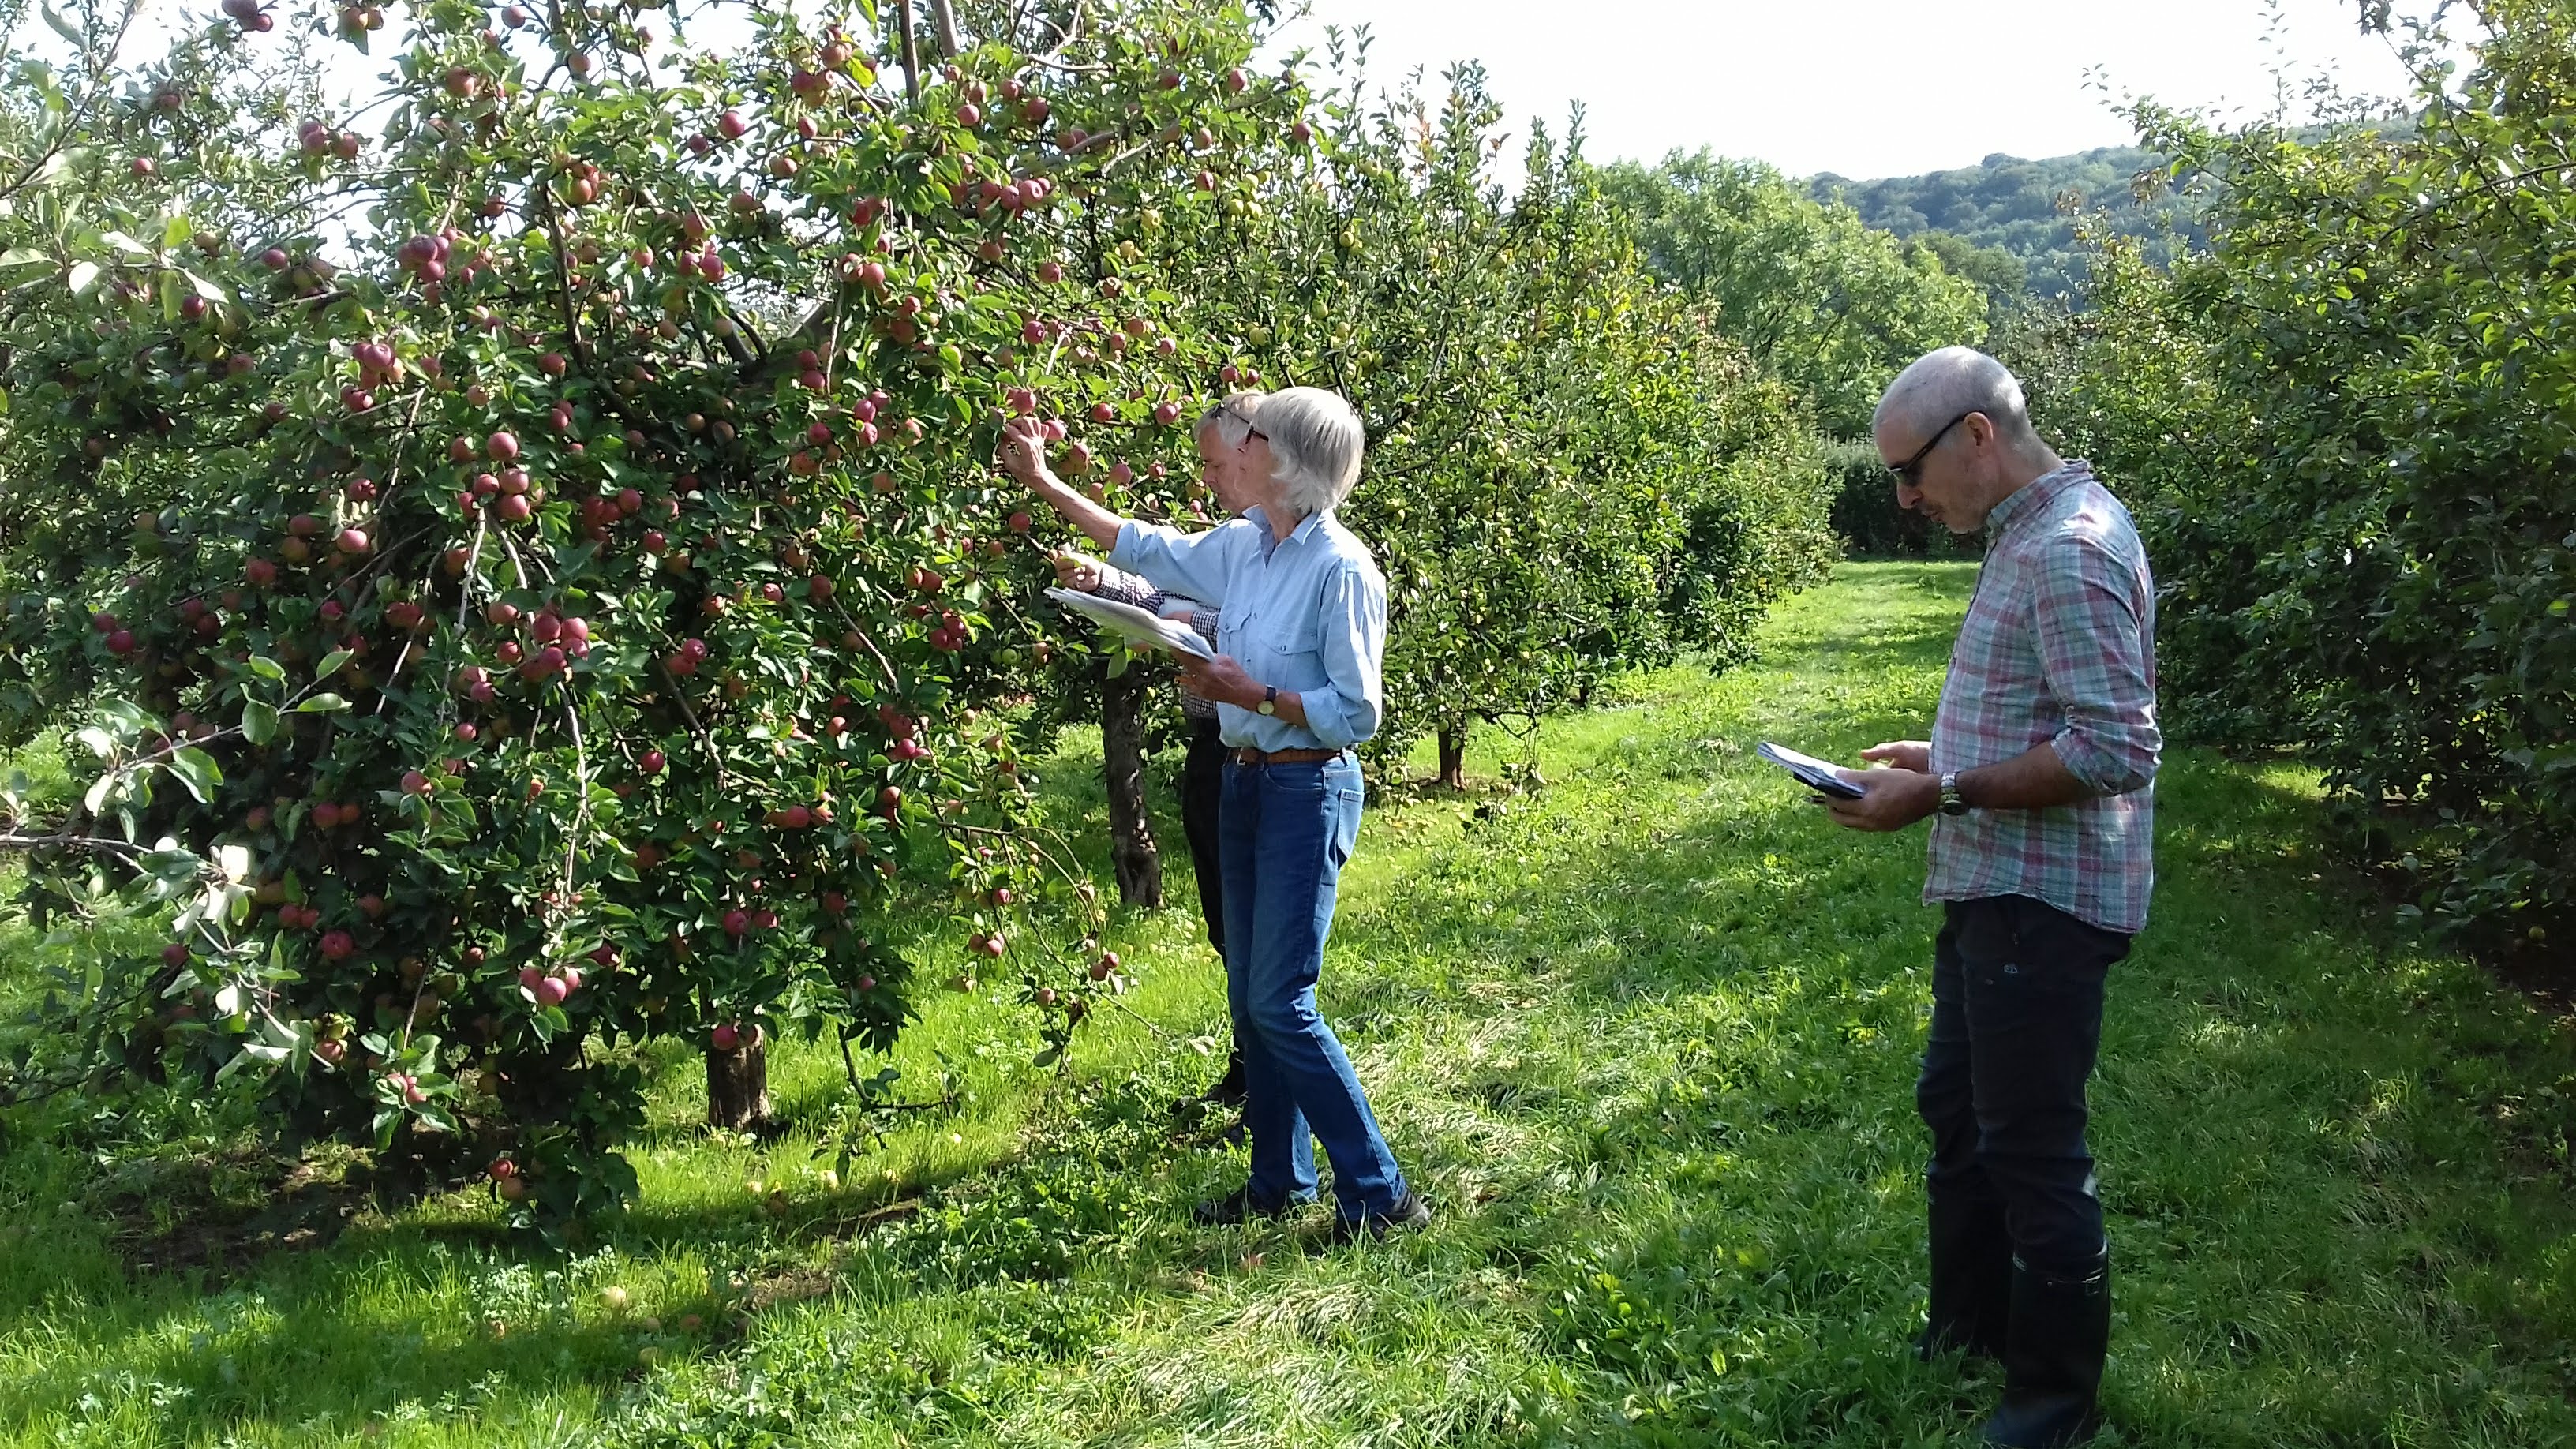 Collecting apple samples